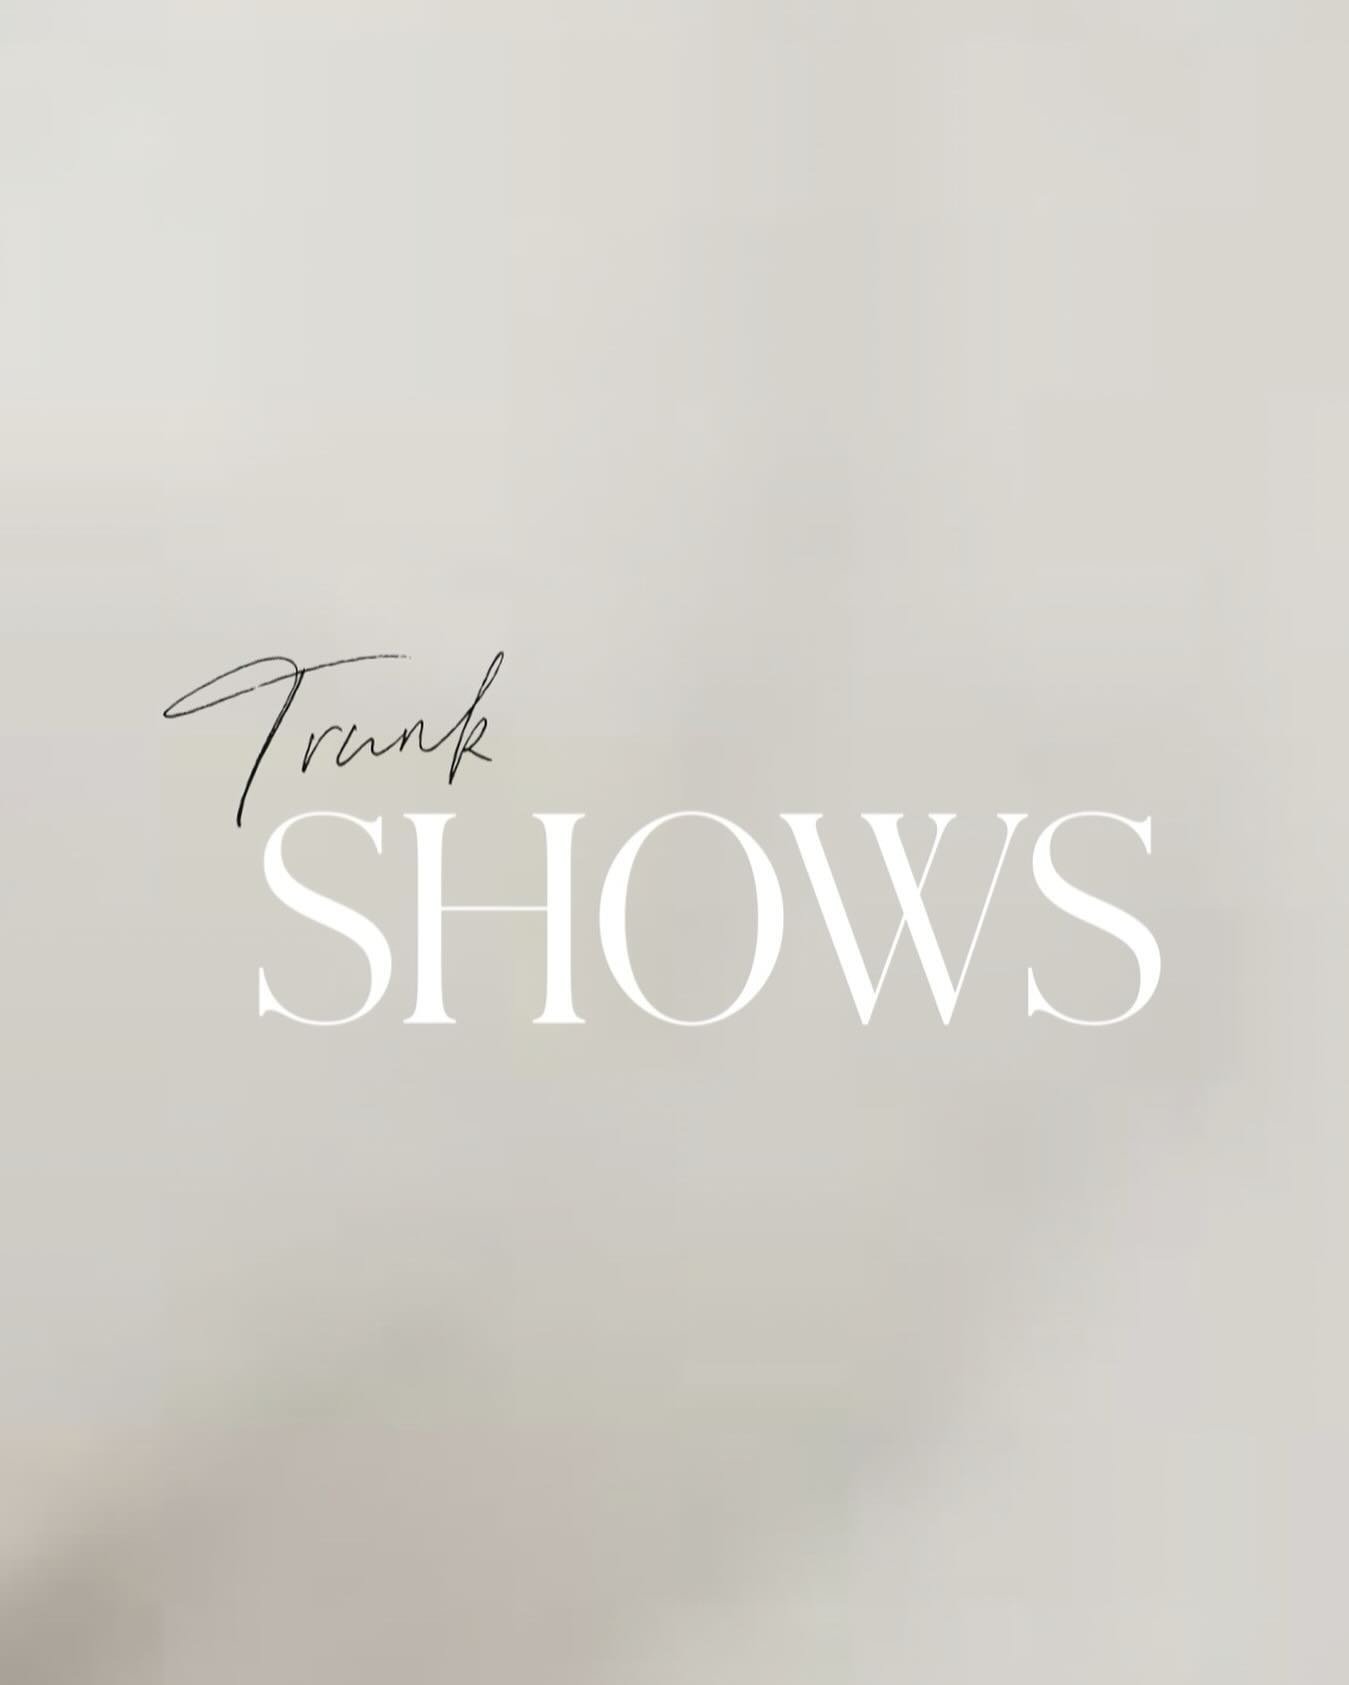 T R U N K &bull; S H O W S 

We are so so excited to have lots of designers here in Timeless and we are always adding to our list so we have the freshest selection for brides to be. 
Attending a trunk show means that you get to say yes to styles that